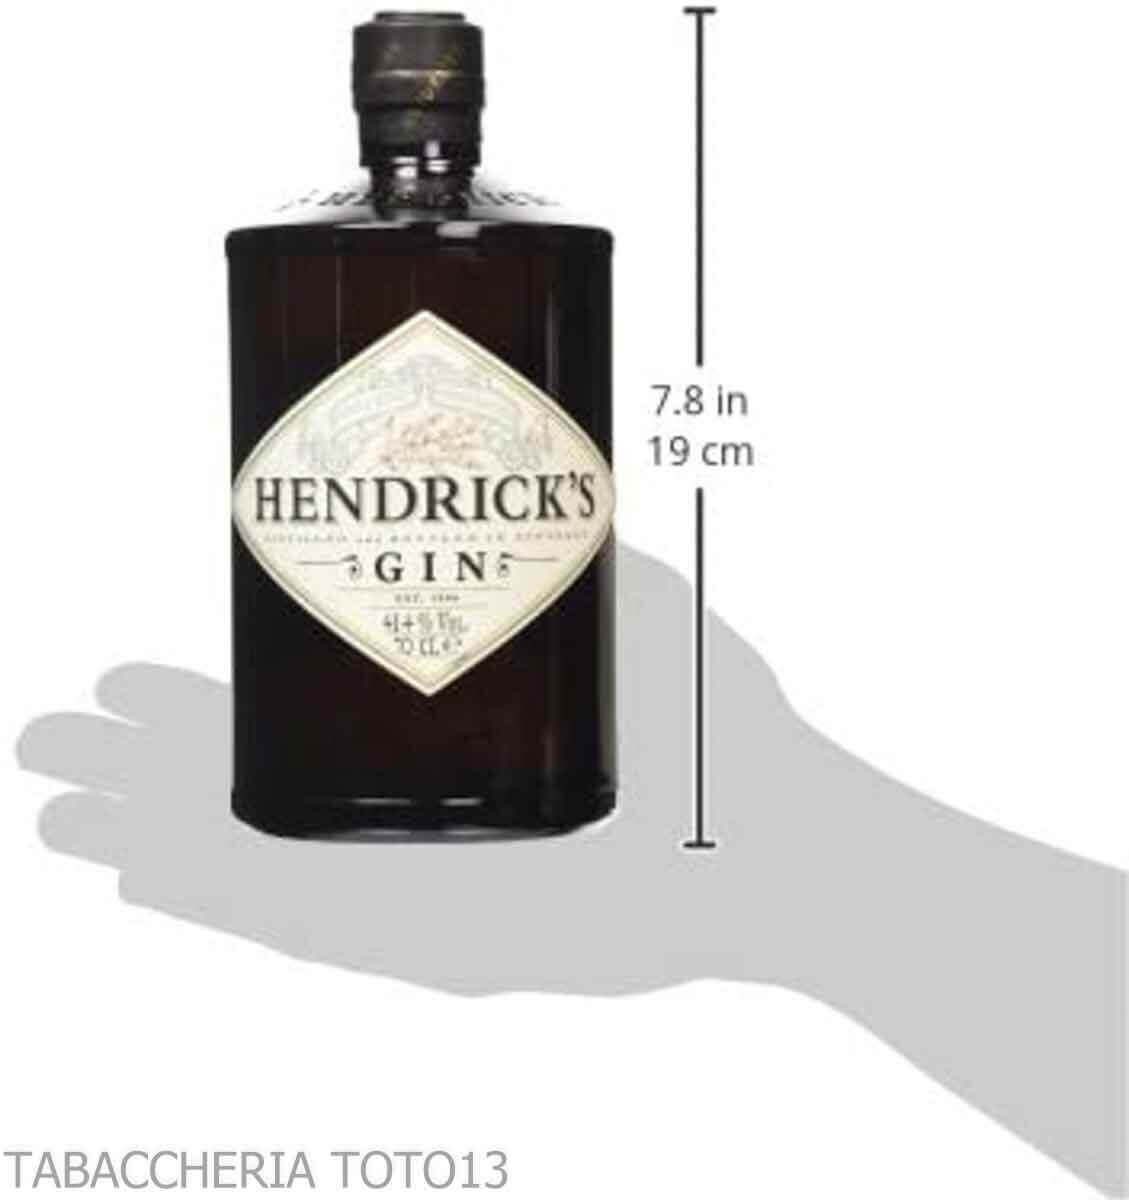 Hendrick's Gin will win you over in the first sip